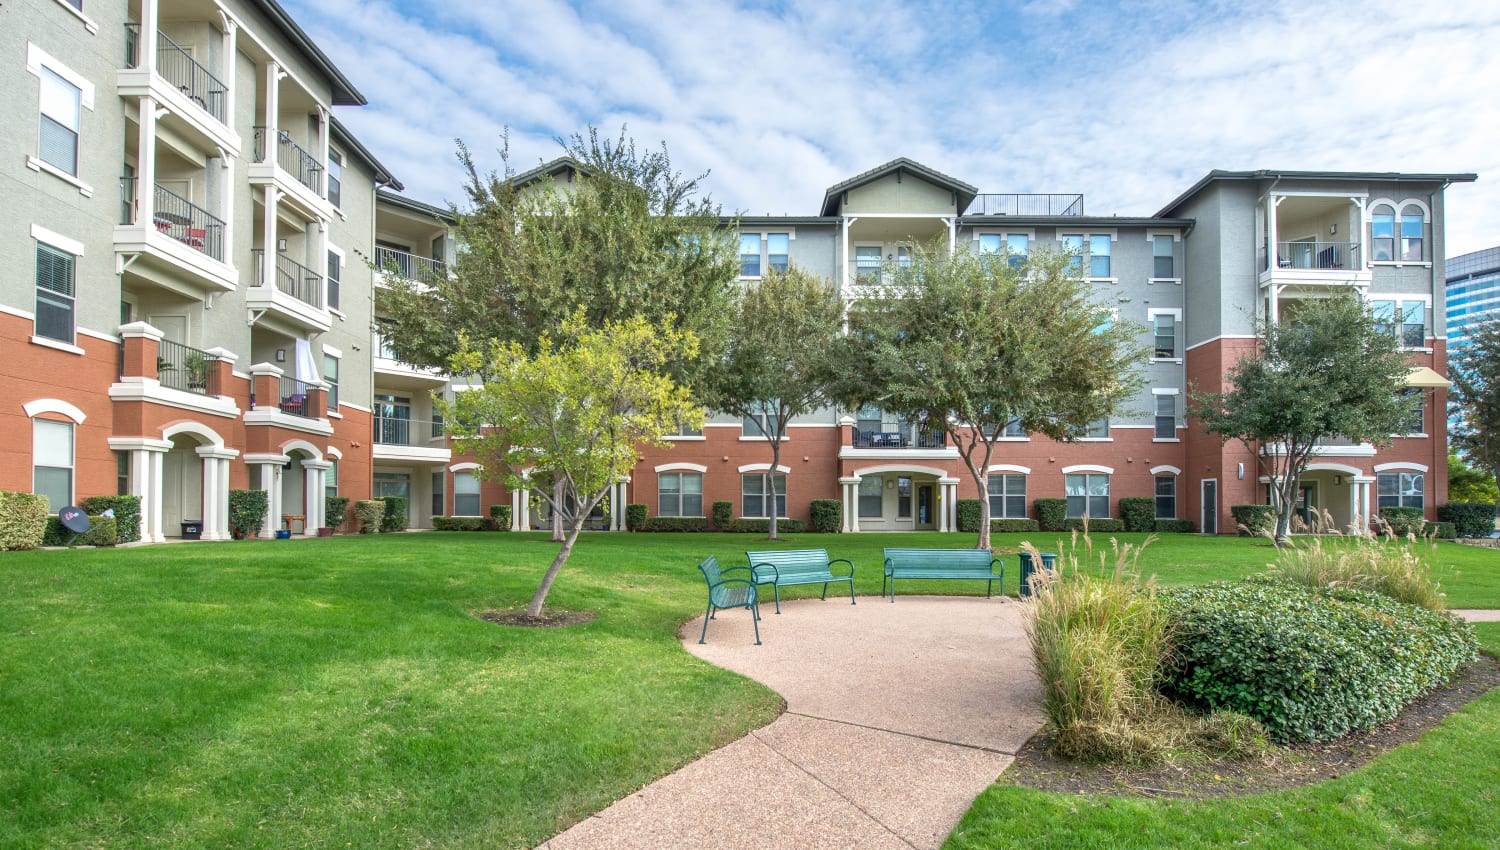 Mature trees and well-manicured landscaping outside resident buildings at Olympus Las Colinas in Irving, Texasq